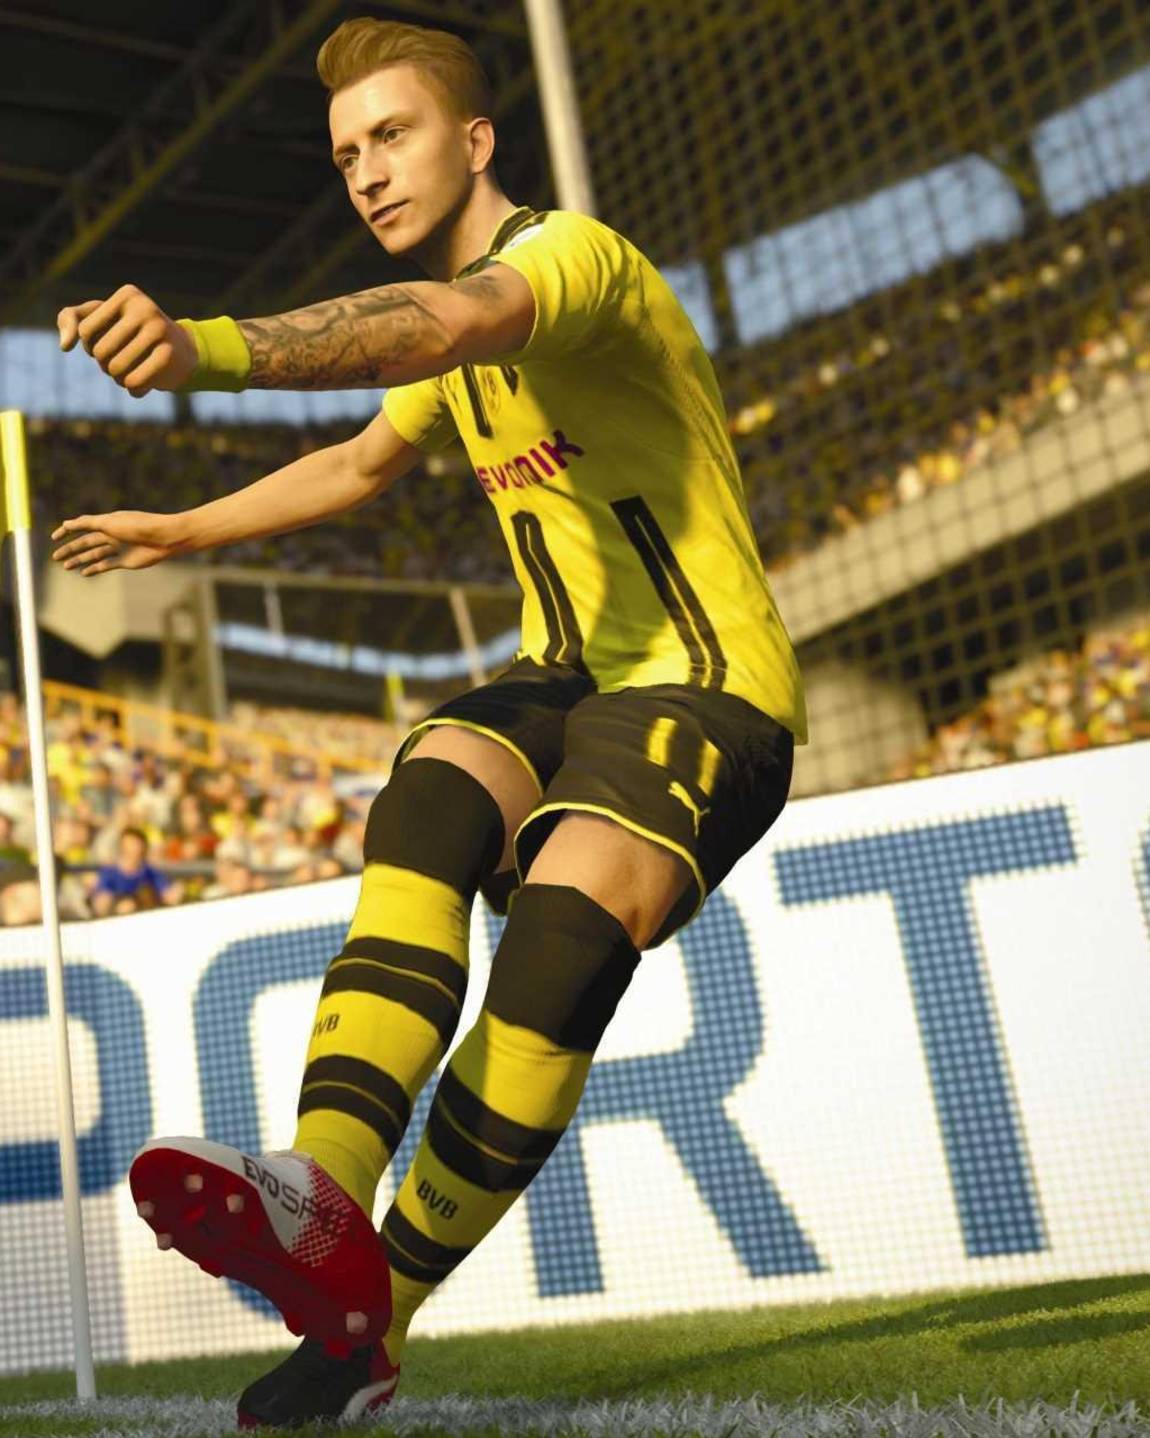 FIFA 17 tips: 11 hints to make you a